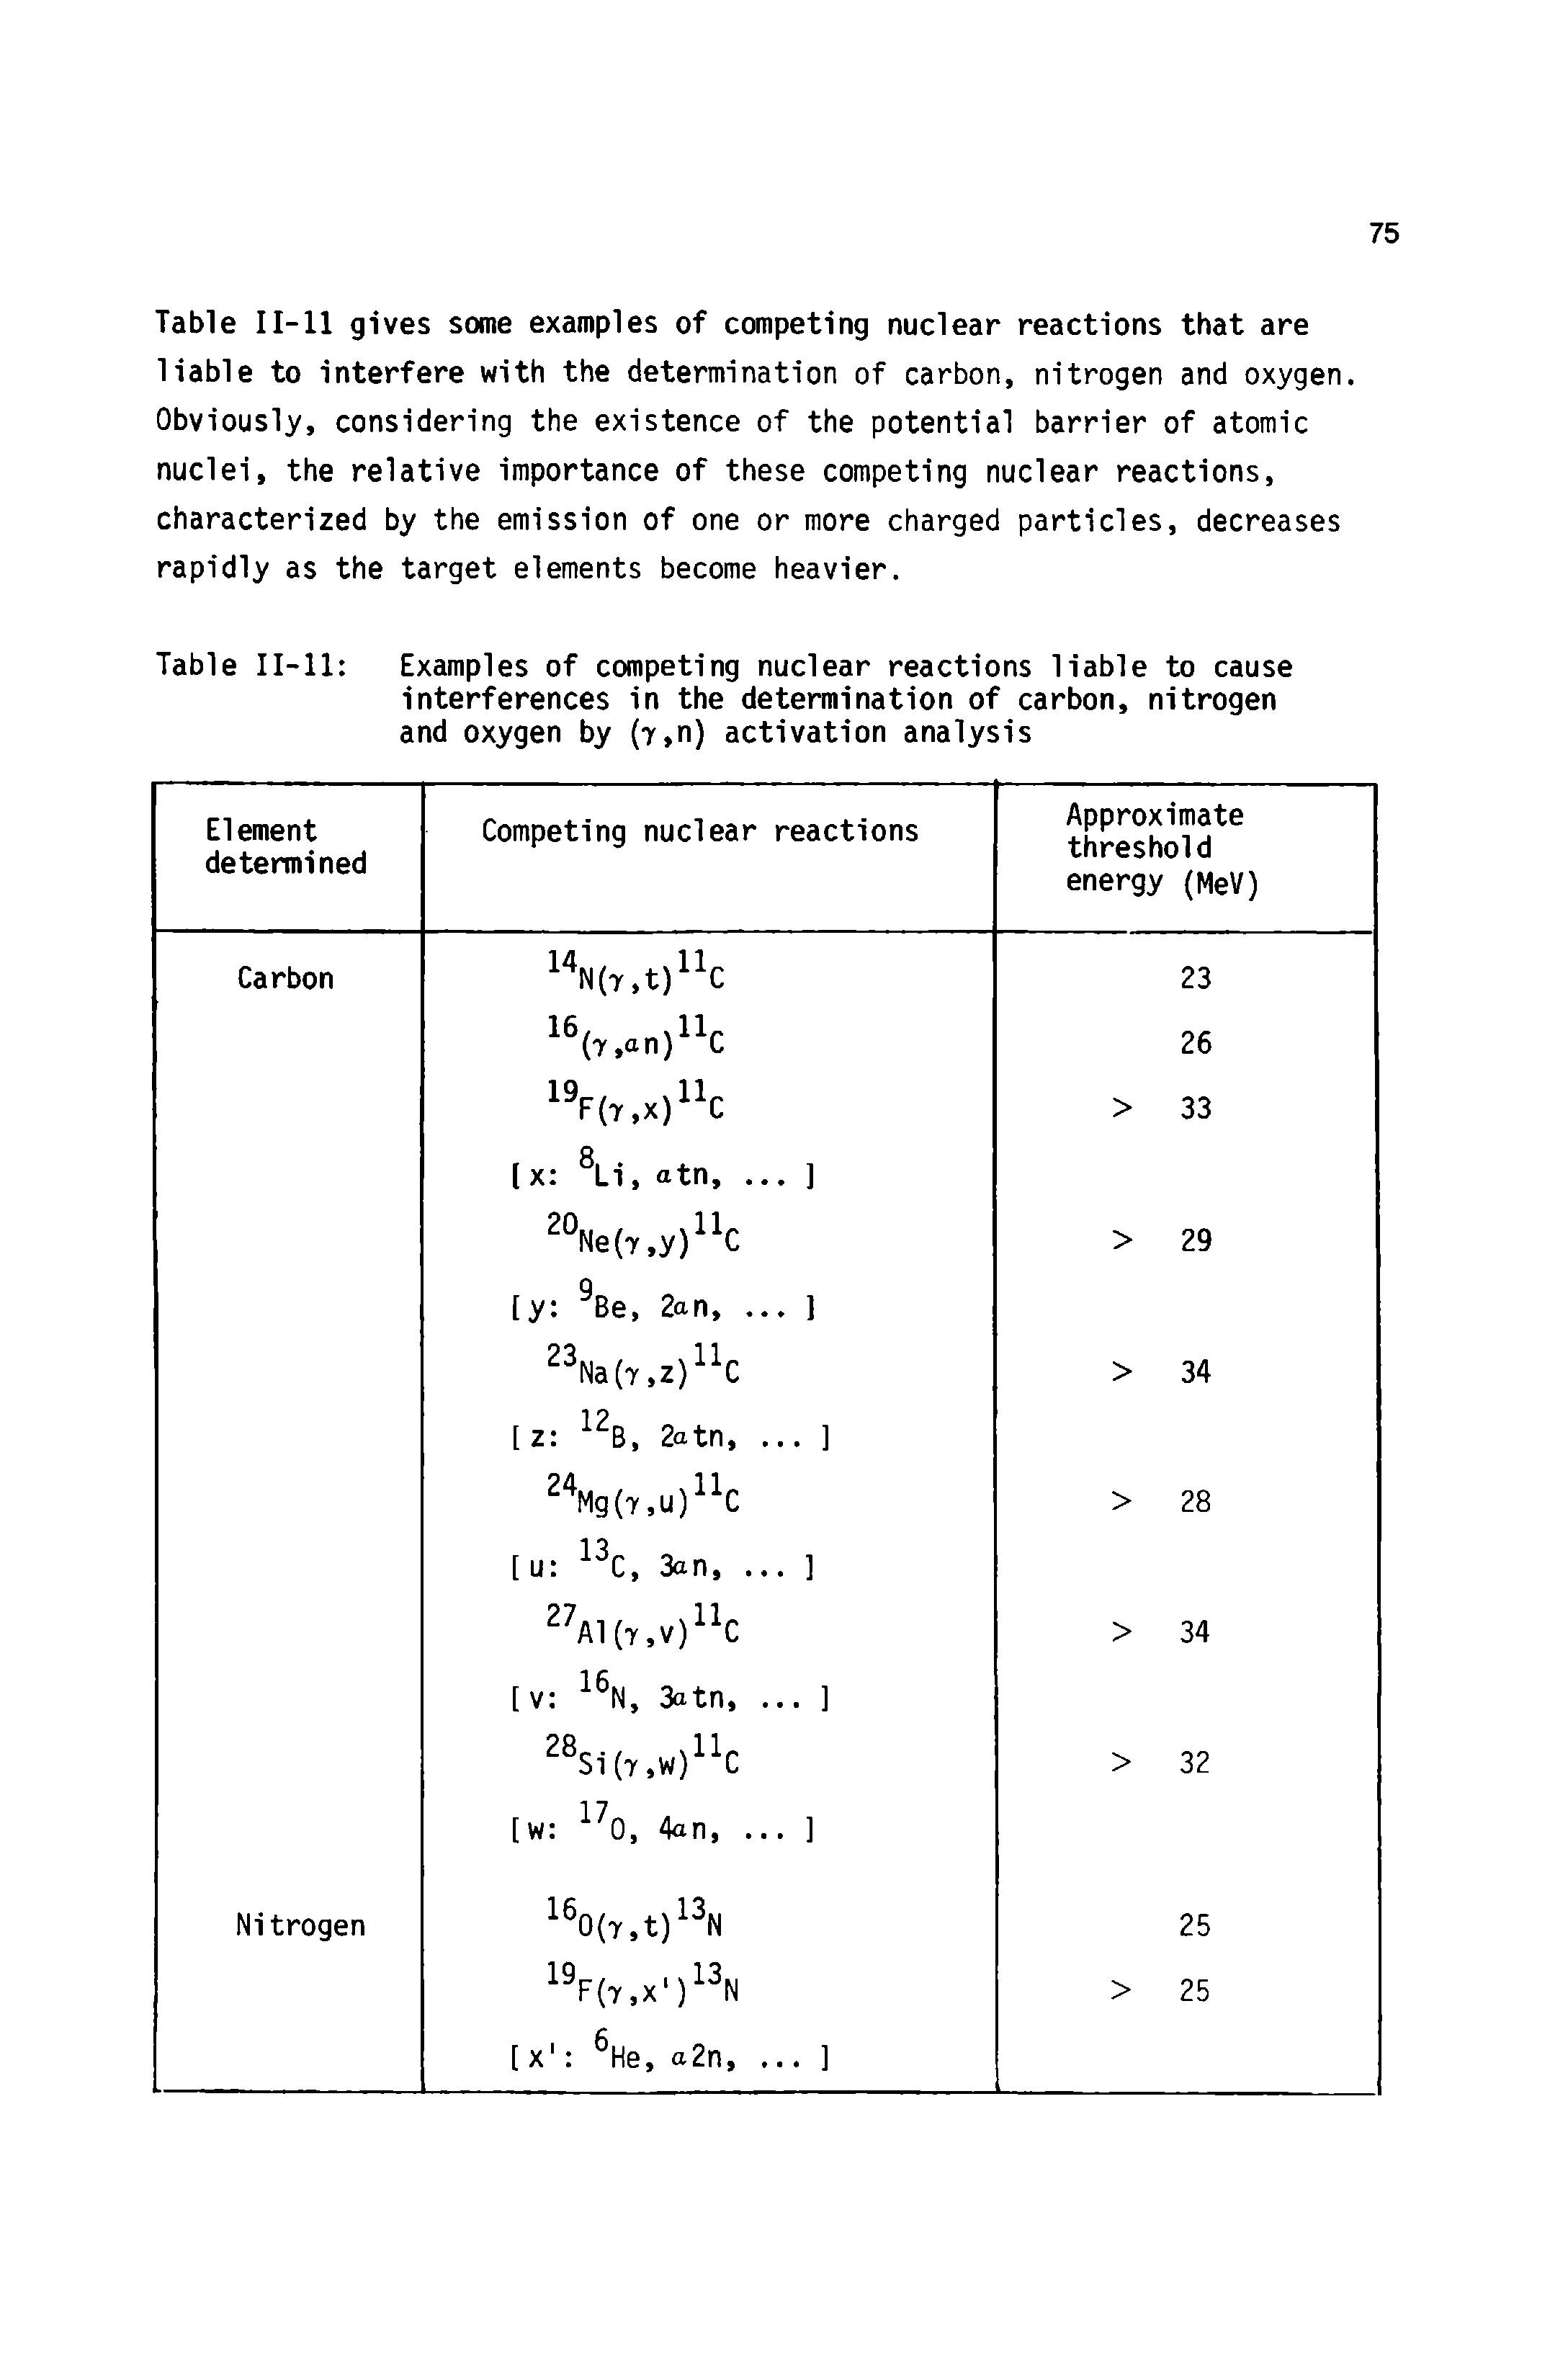 Table II-ll Examples of competing nuclear reactions liable to cause interferences in the determination of carbon, nitrogen and oxygen by (r,n) activation analysis...